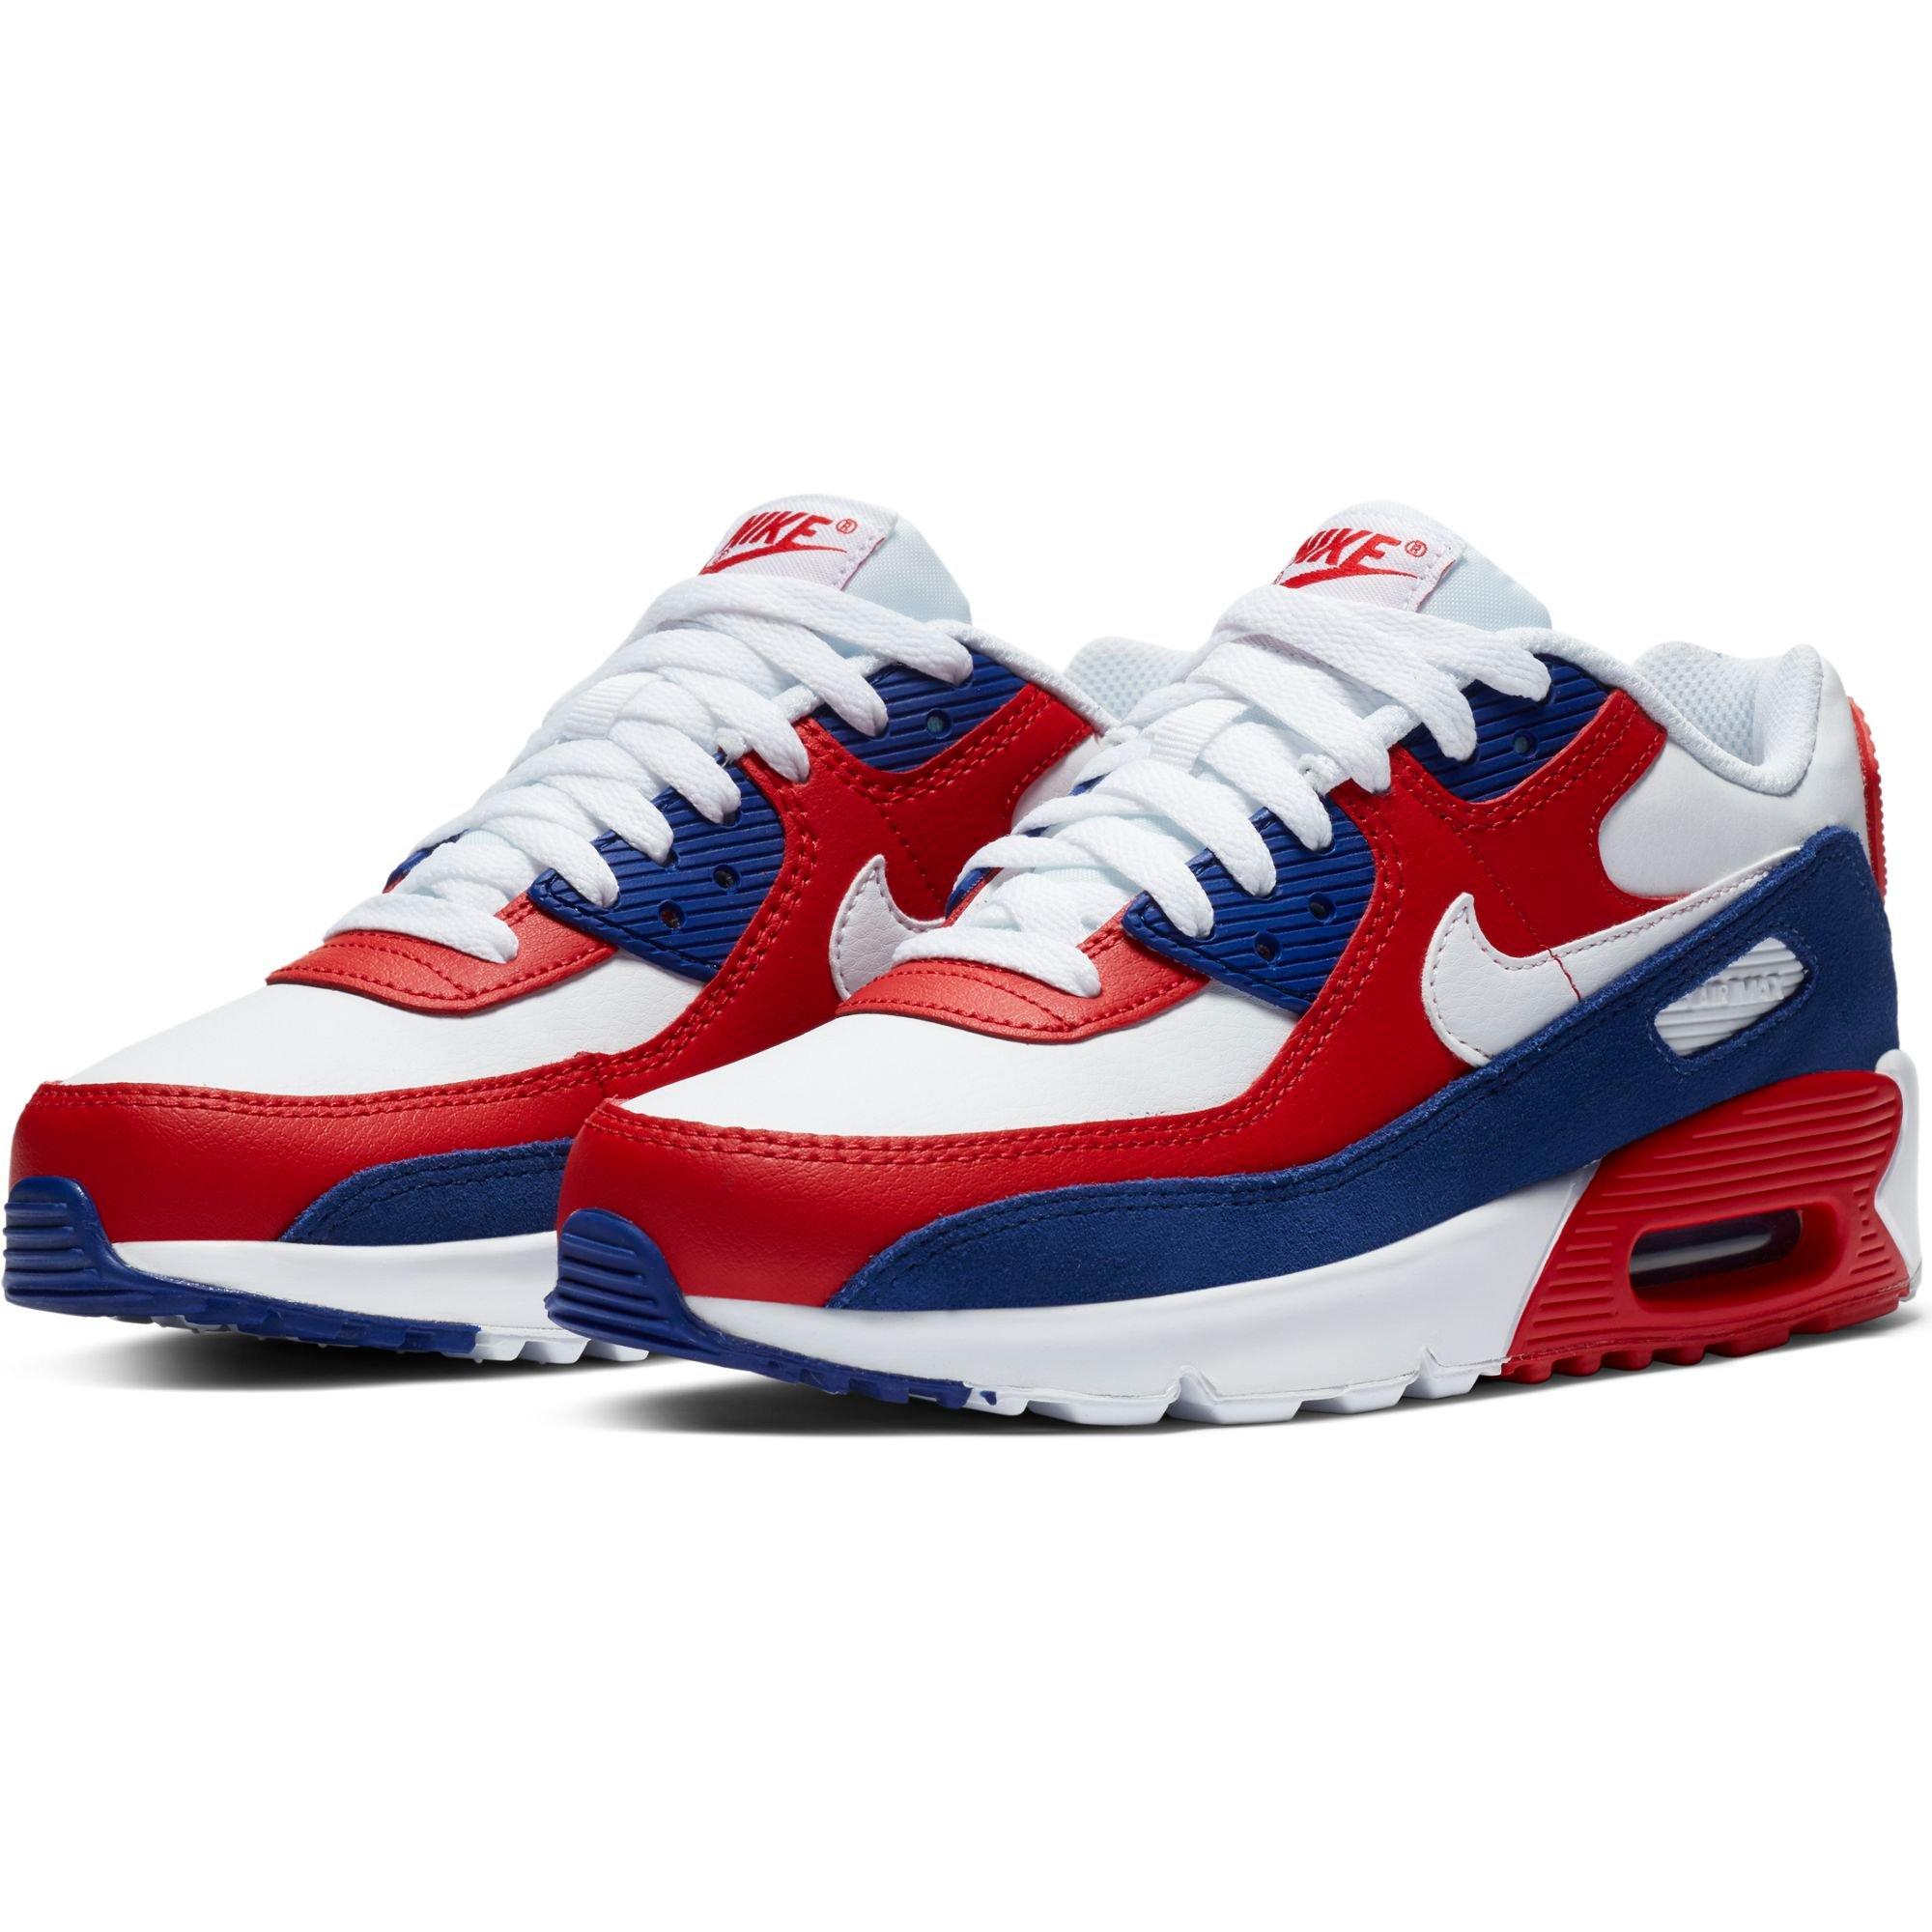 red white and blue air maxes